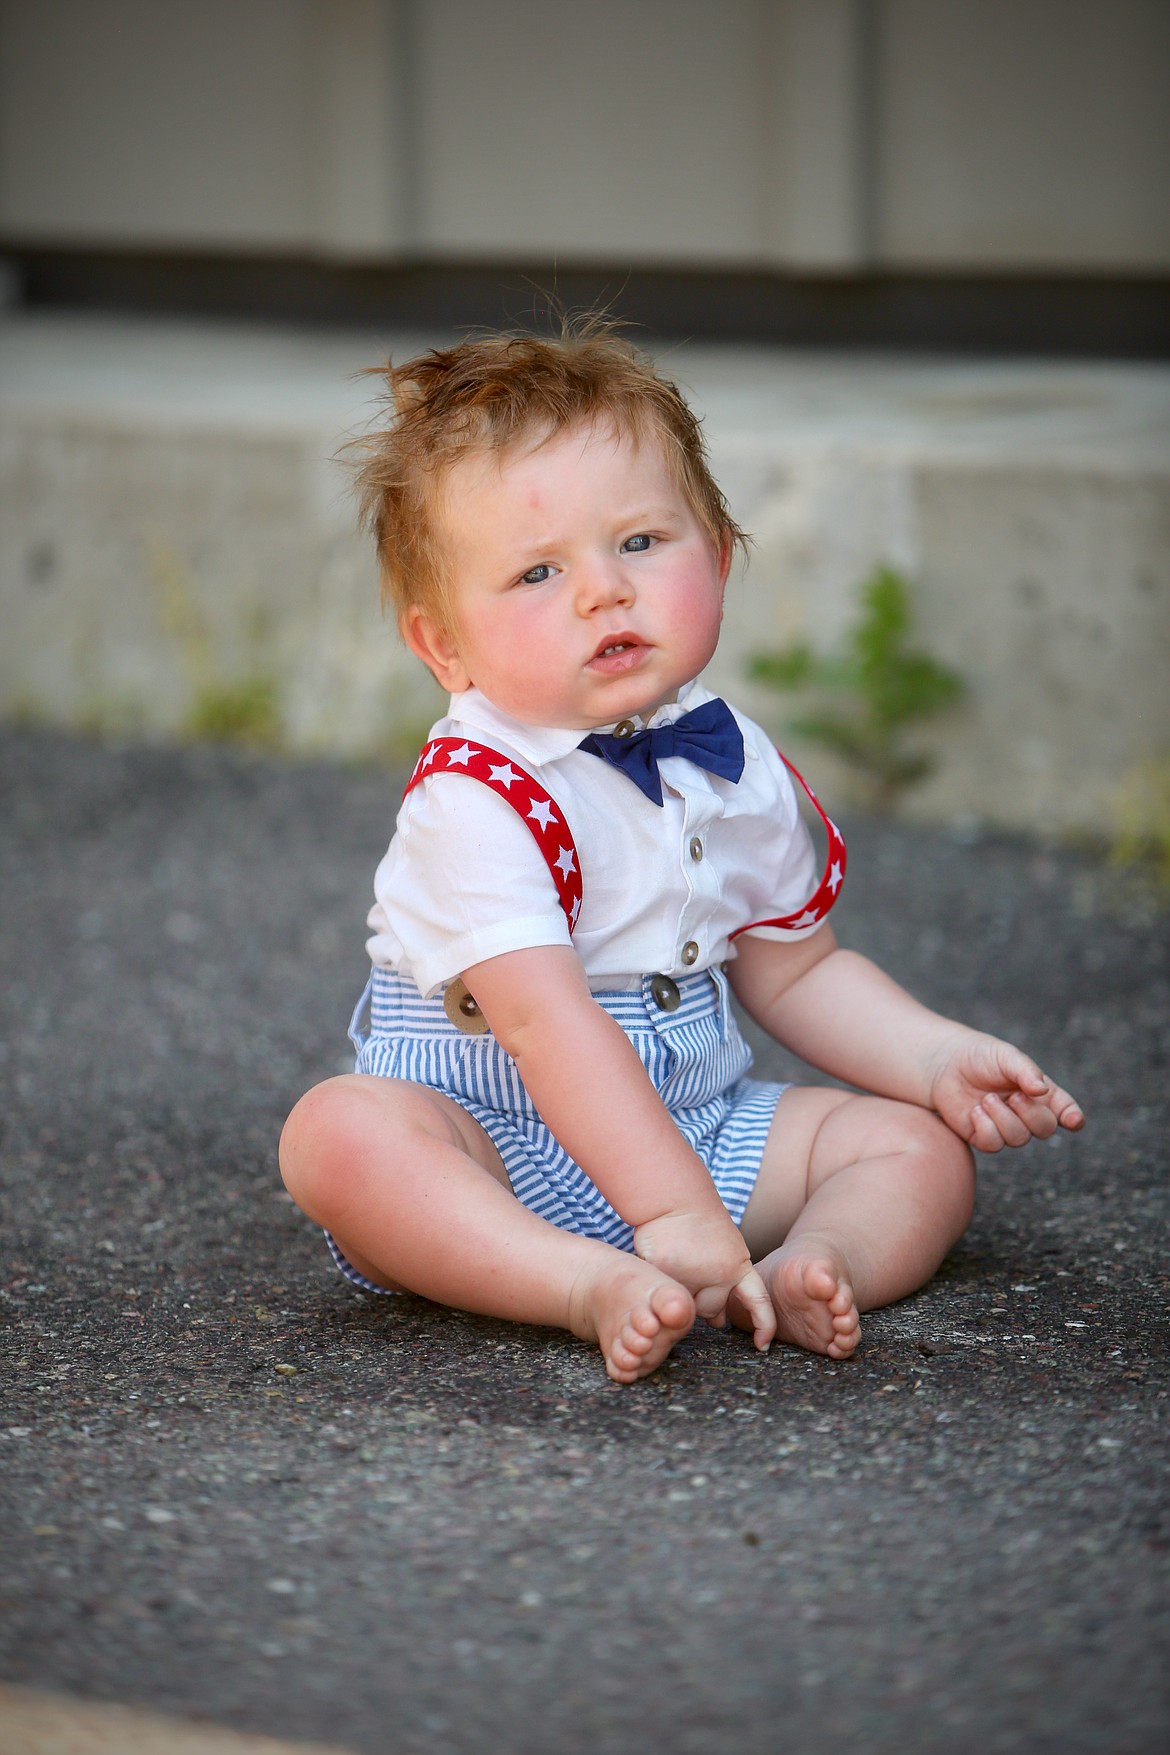 Eleven-month-old Theodore Nelson, of Bigfork, takes a break in the shade during the Bigfork Fourth of July Parade.
Mackenzie Reiss/Bigfork Eagle